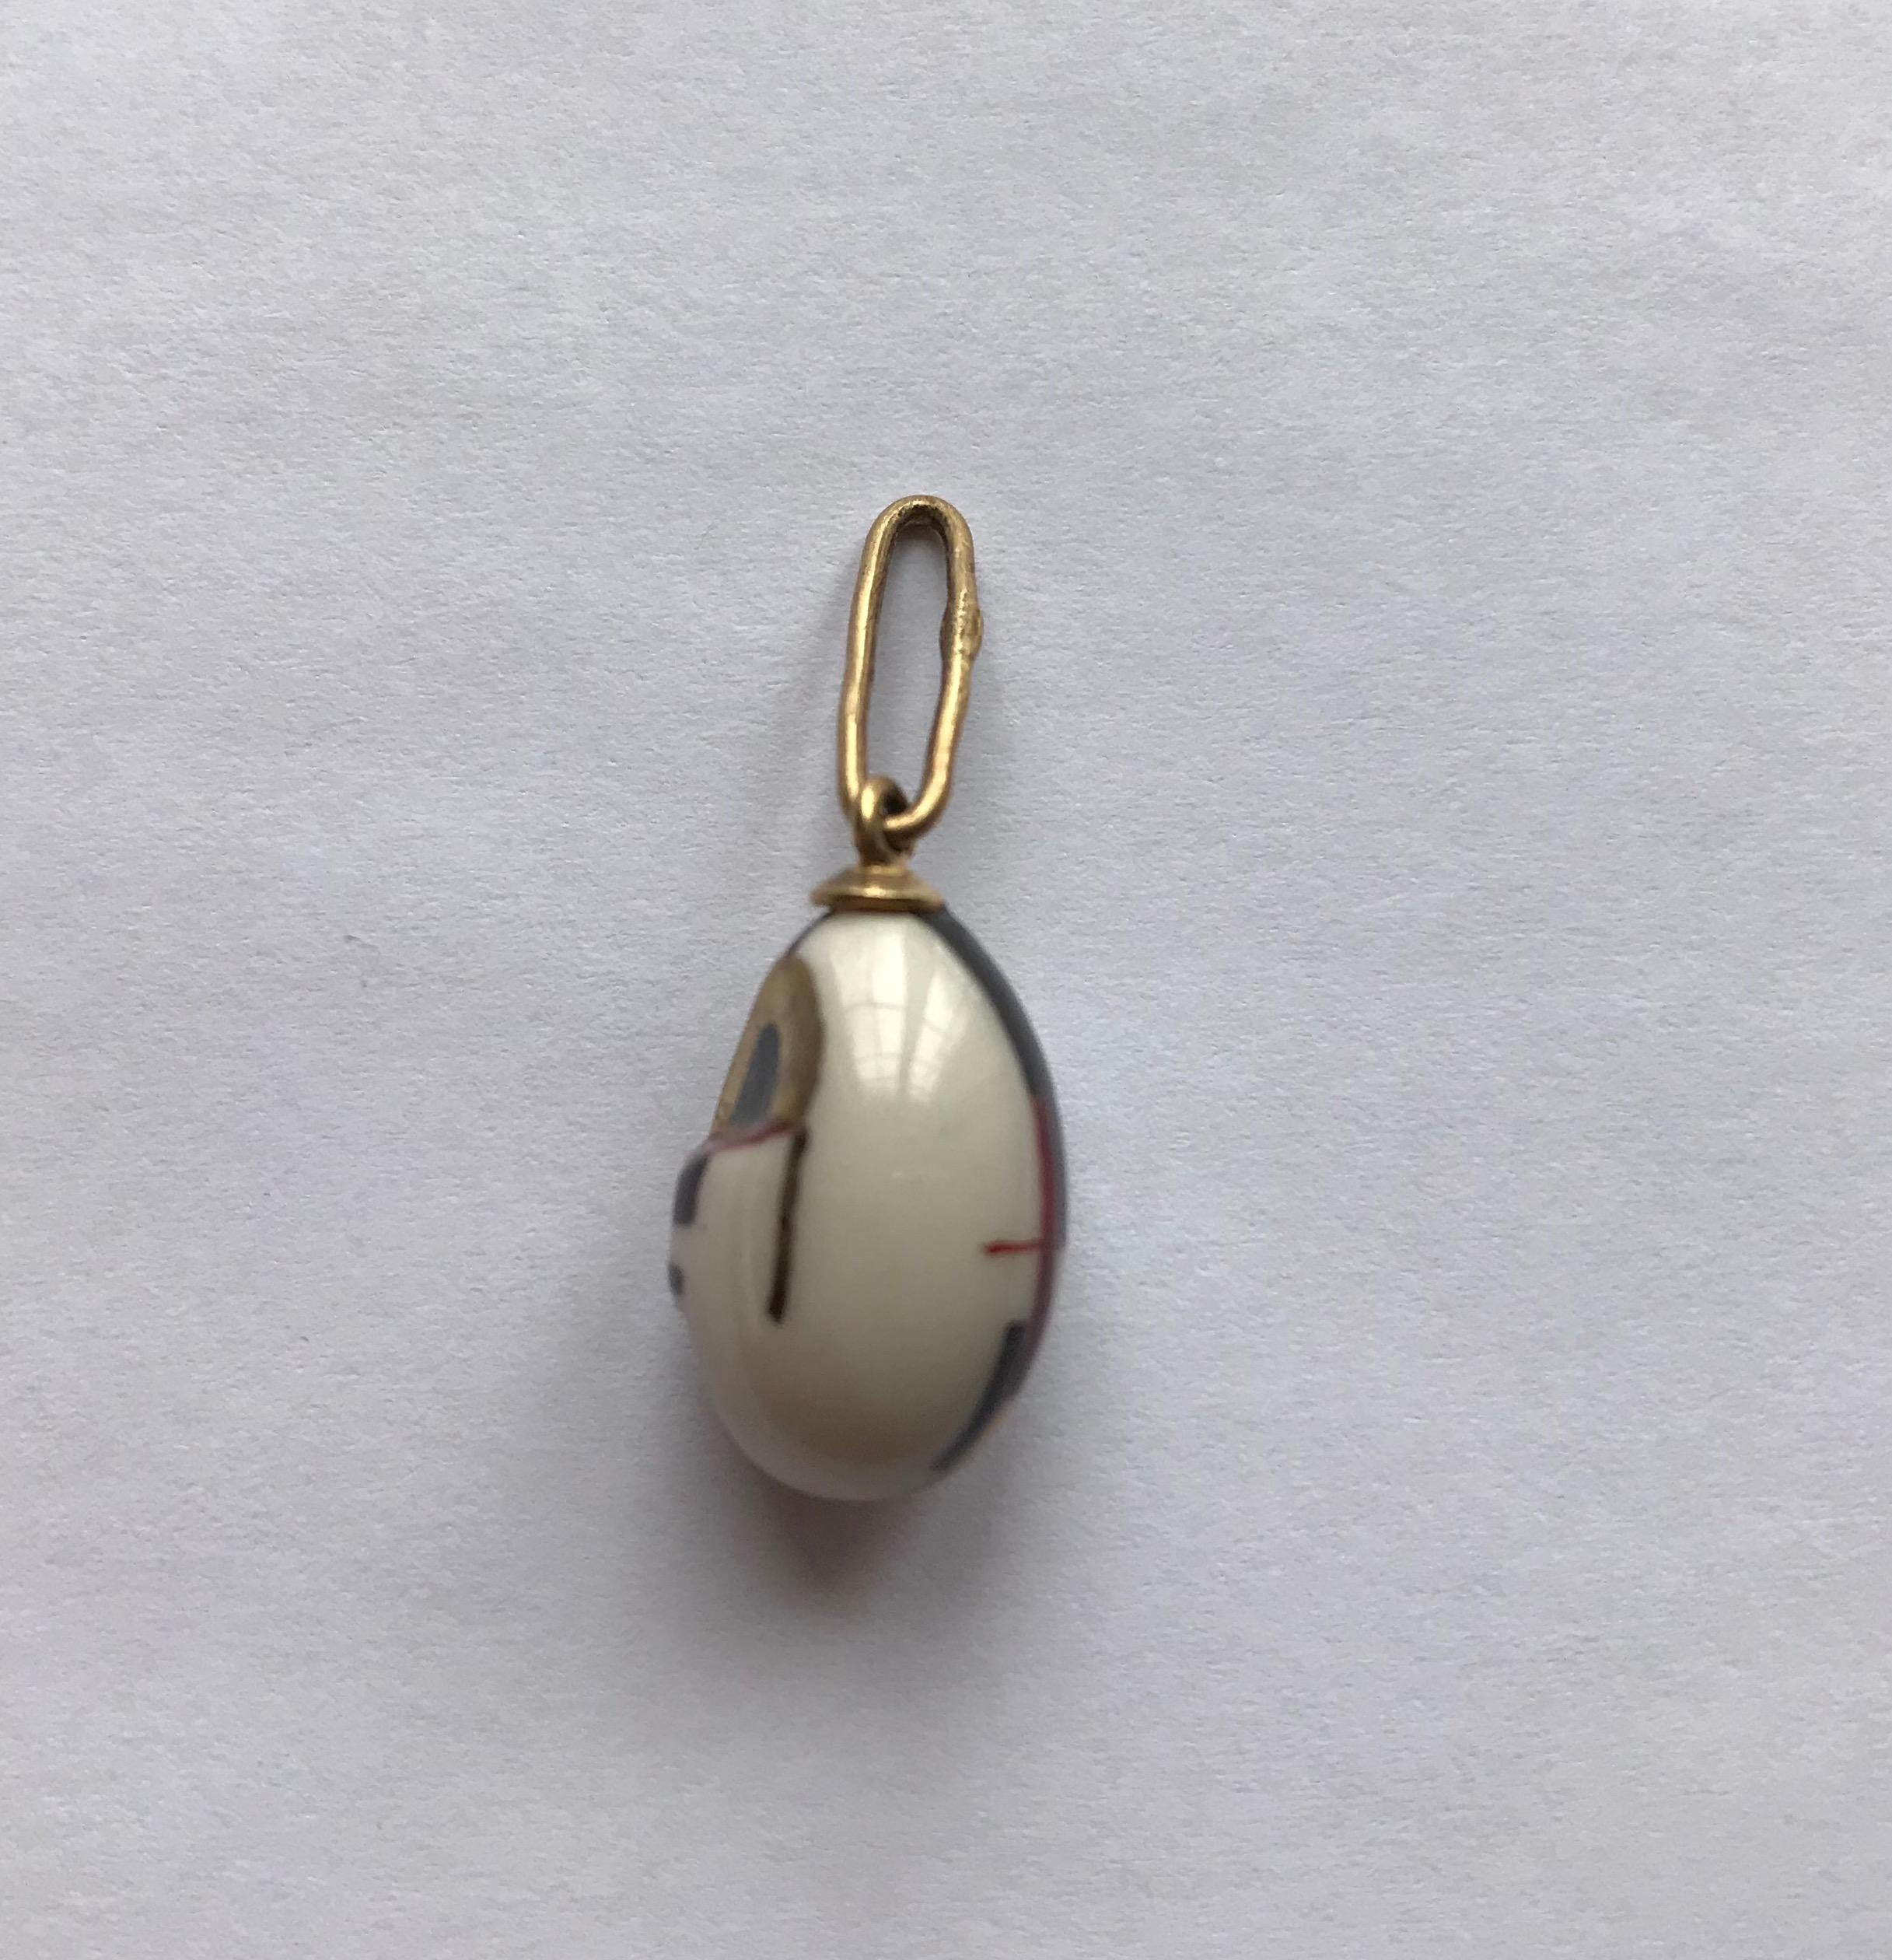 Modernist Russian Porcelain Mask Miniature Egg Pendant, Style of Malevich, 21st Century For Sale